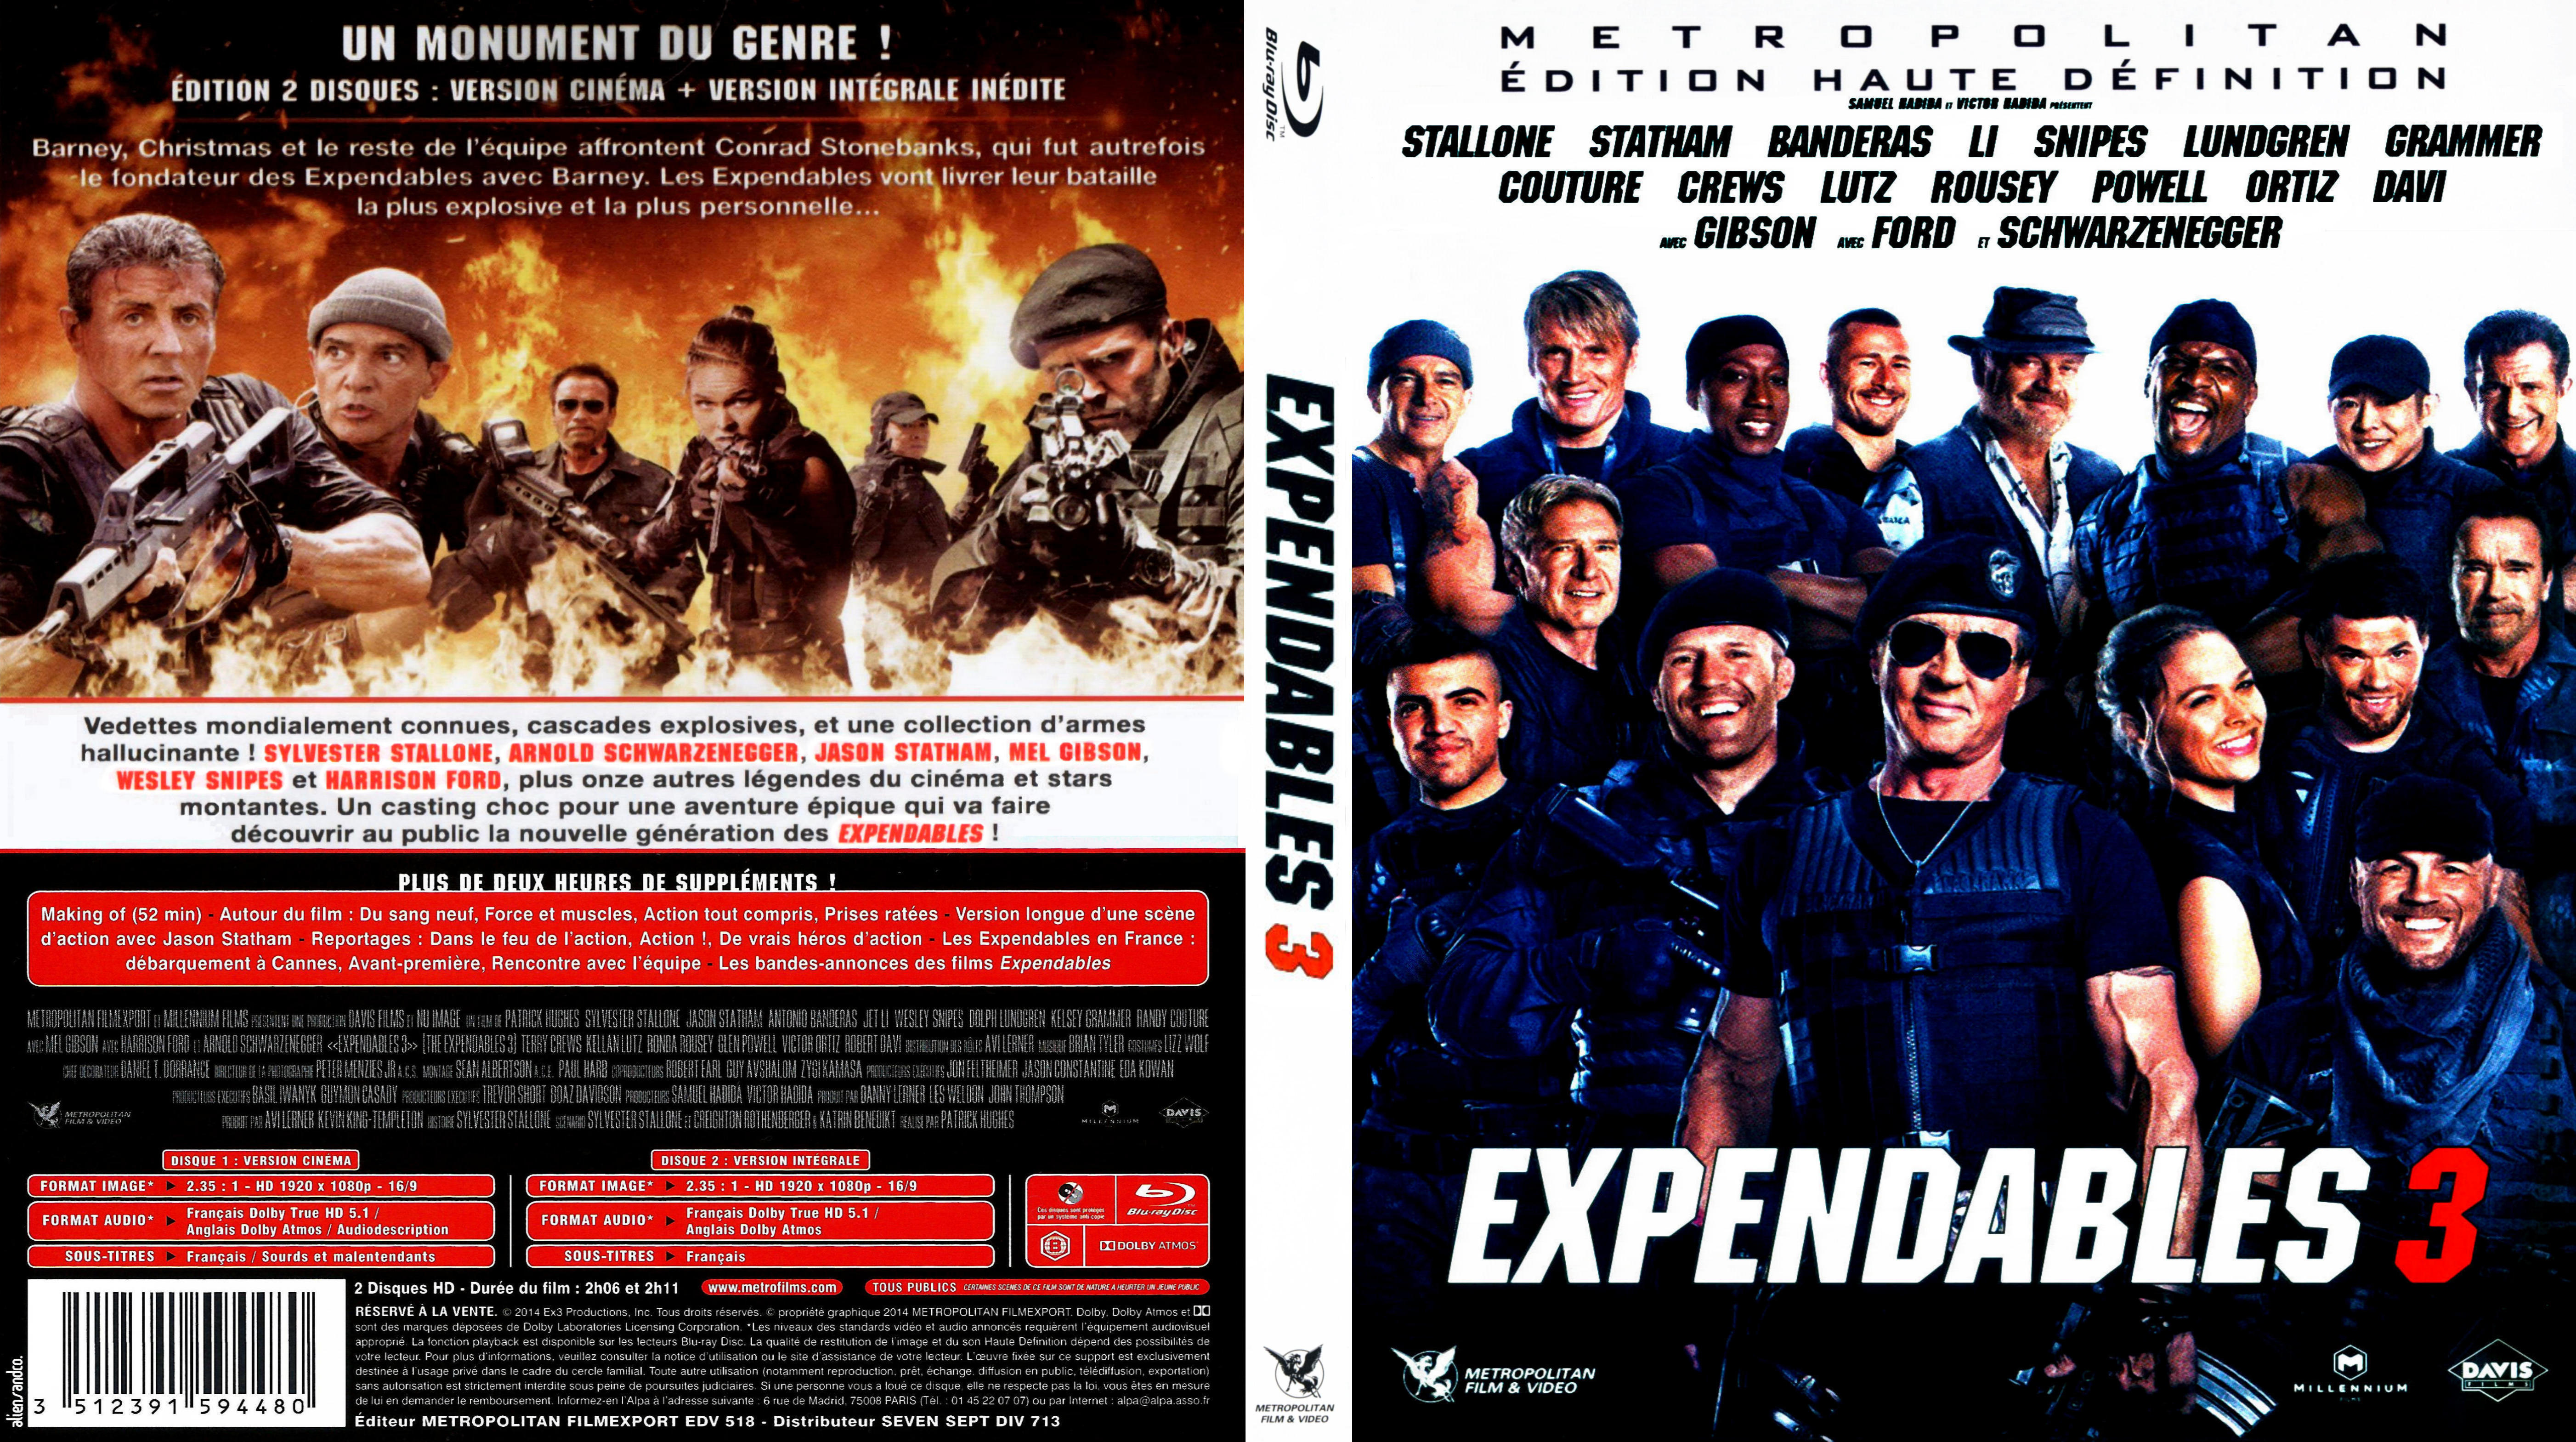 Jaquette DVD Expendables 3 custom (BLU-RAY)